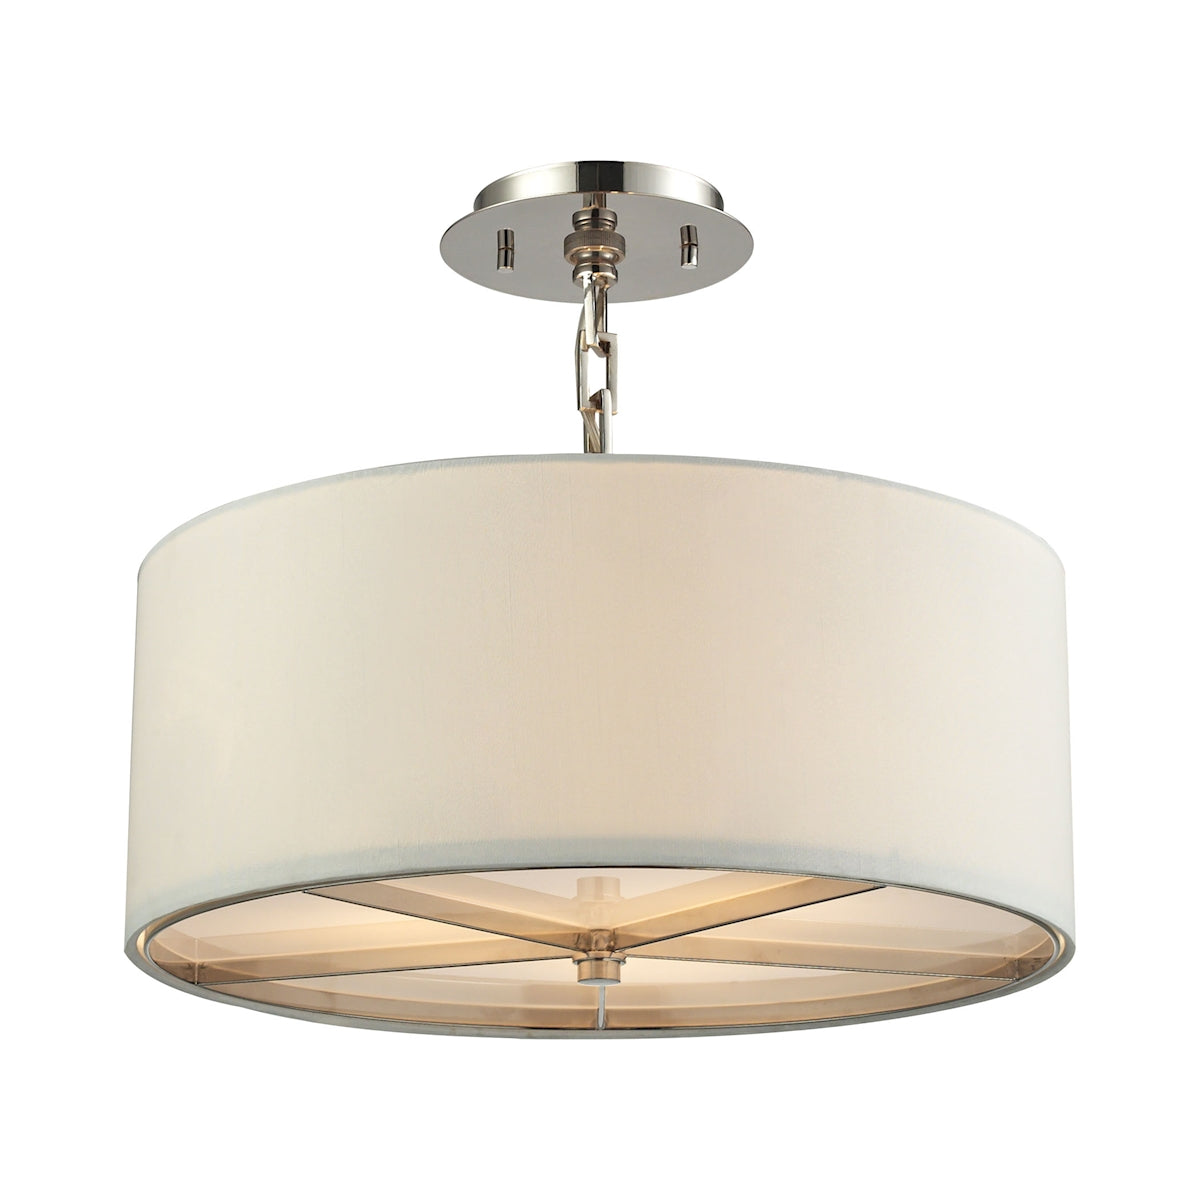 ELK Lighting 31650/3 - Selma 17" Wide 3-Light Pendant in Polished Nickel with White Fabric Shade